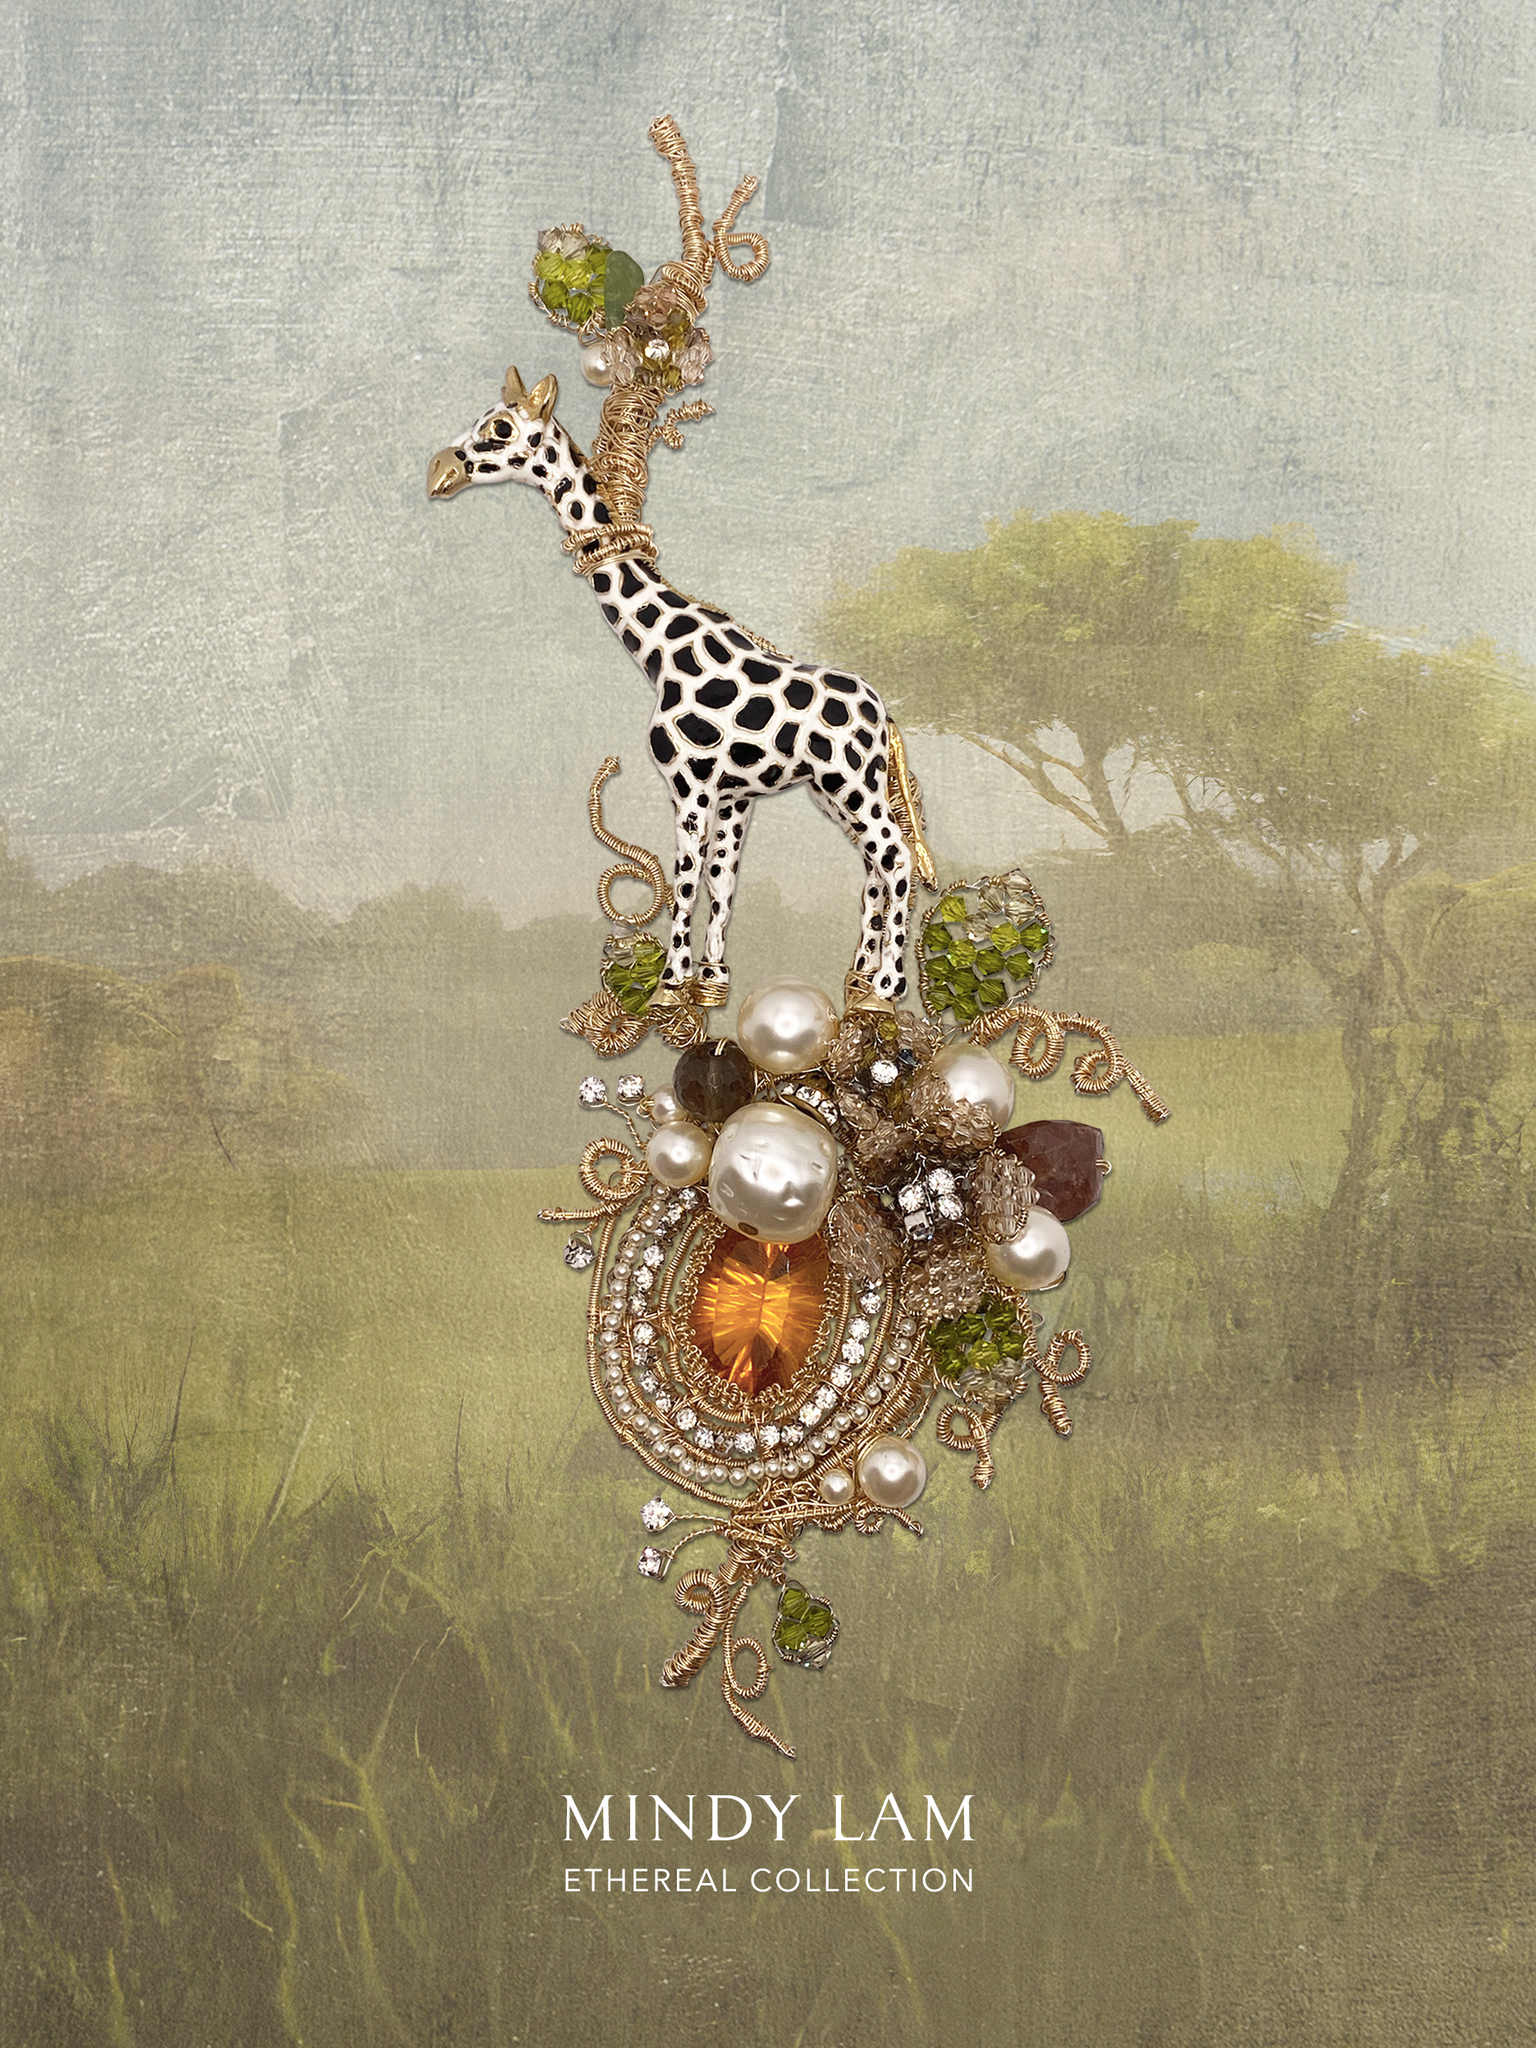 Ethereal Collection Lapel Pin - Woodland Beauty